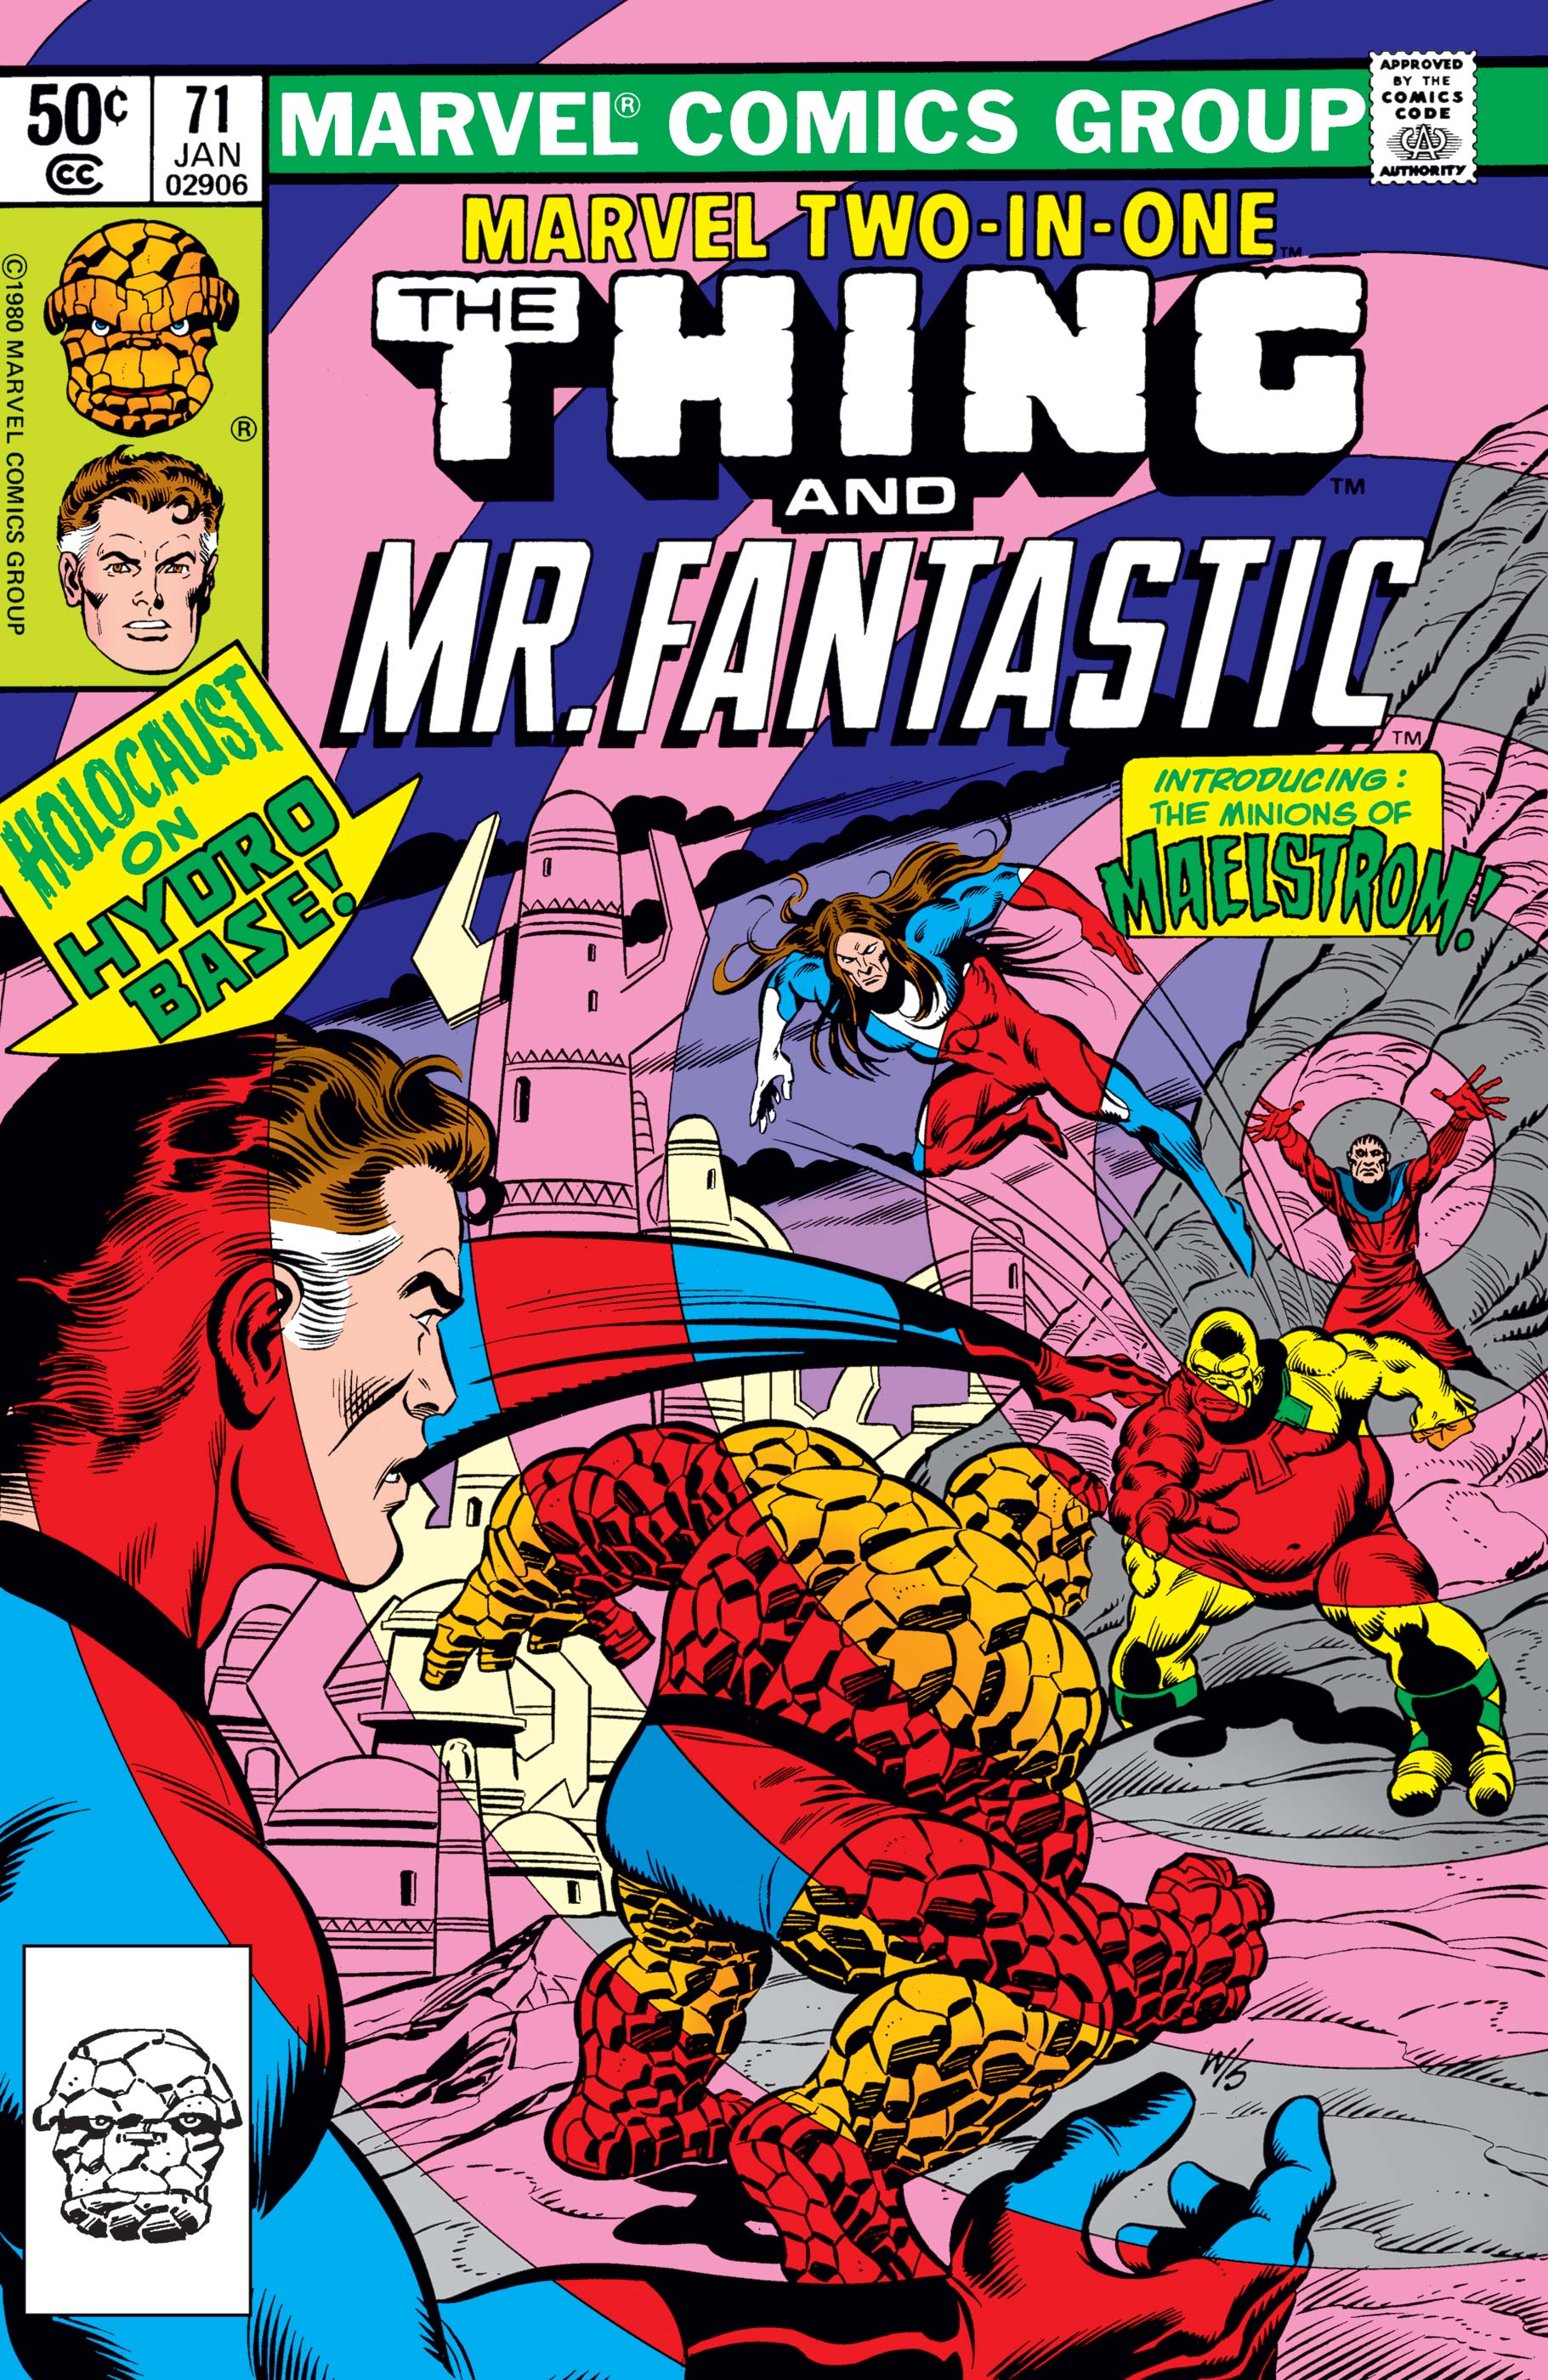 Marvel Two-in-One (1974) #71